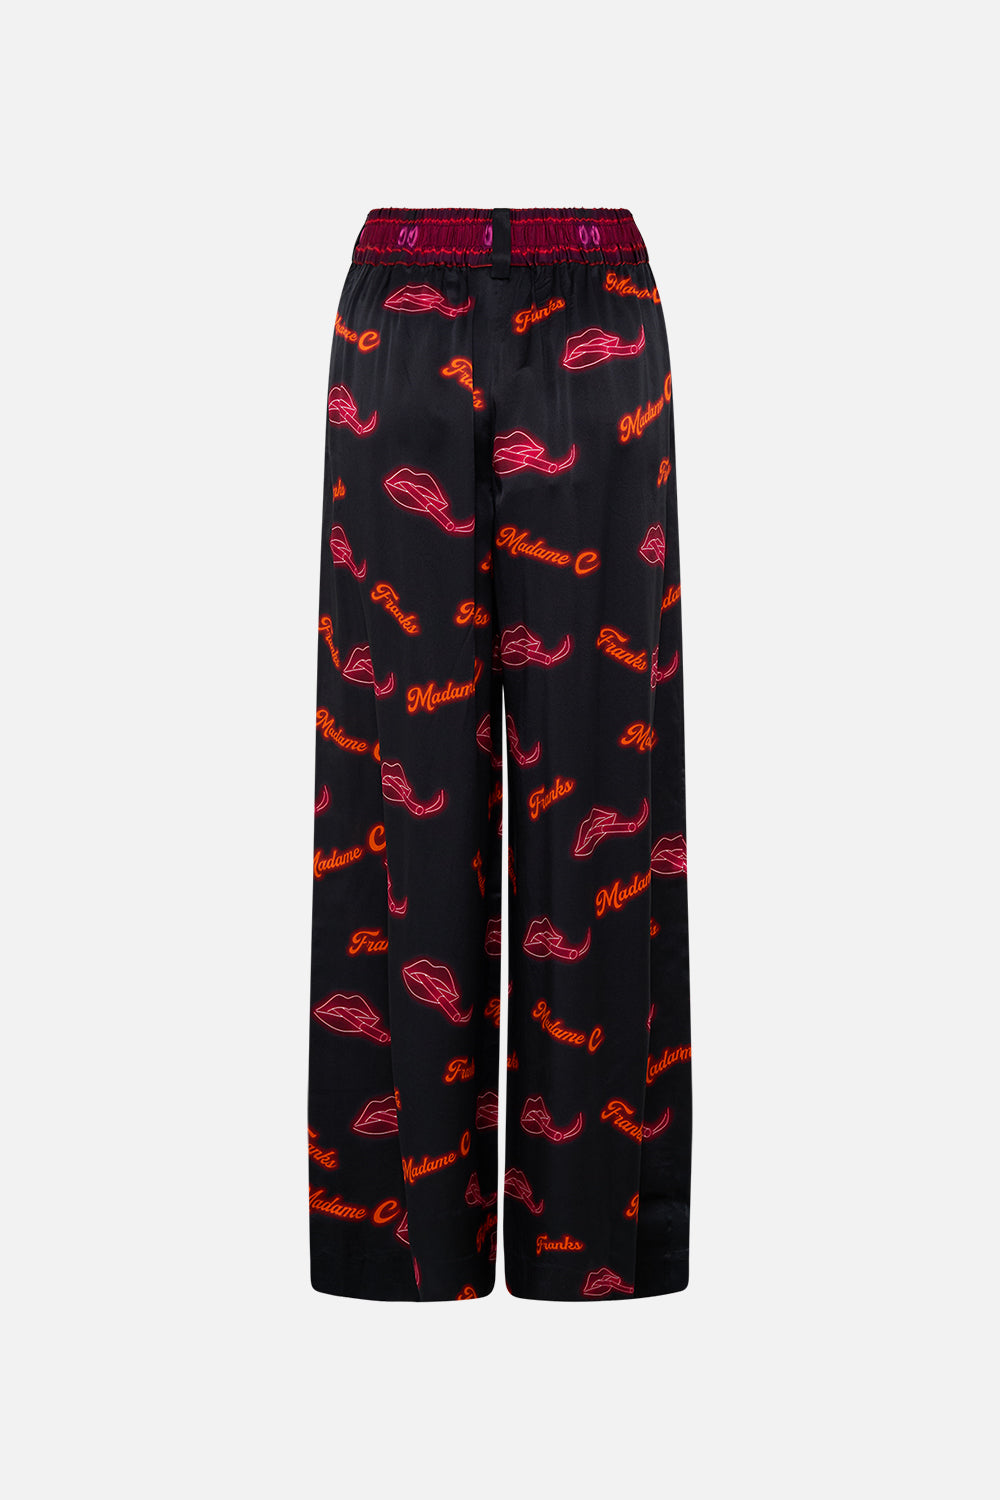 CAMILLA black wide leg waisted pant in Electric Loveland print